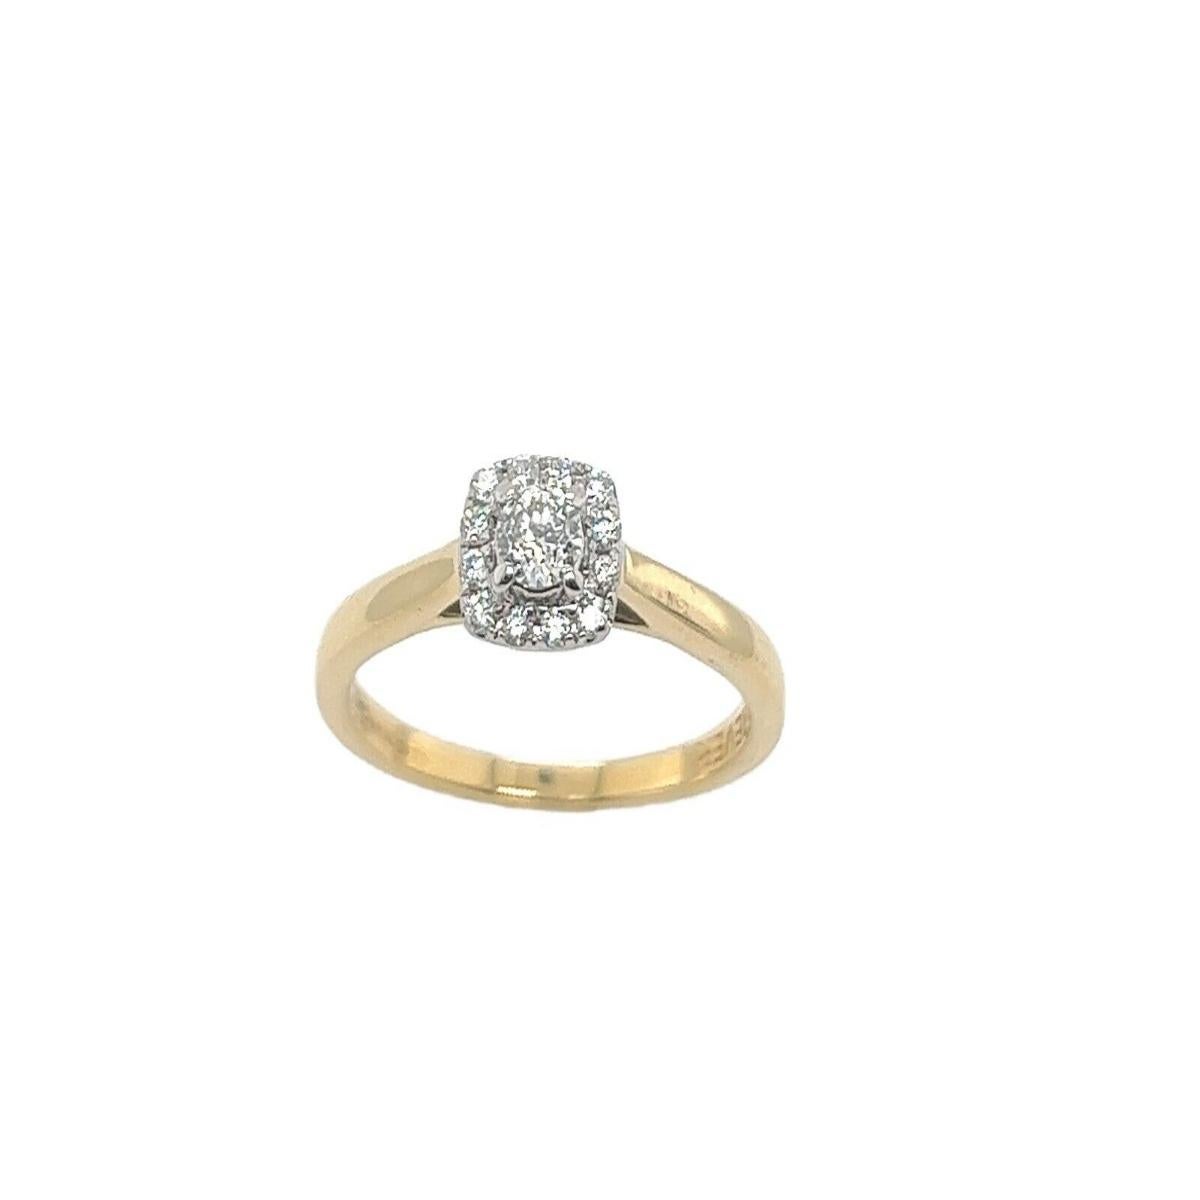 Diamond Halo Ring Set with 0.25ct of Diamonds in 18ct Yellow & White Gold